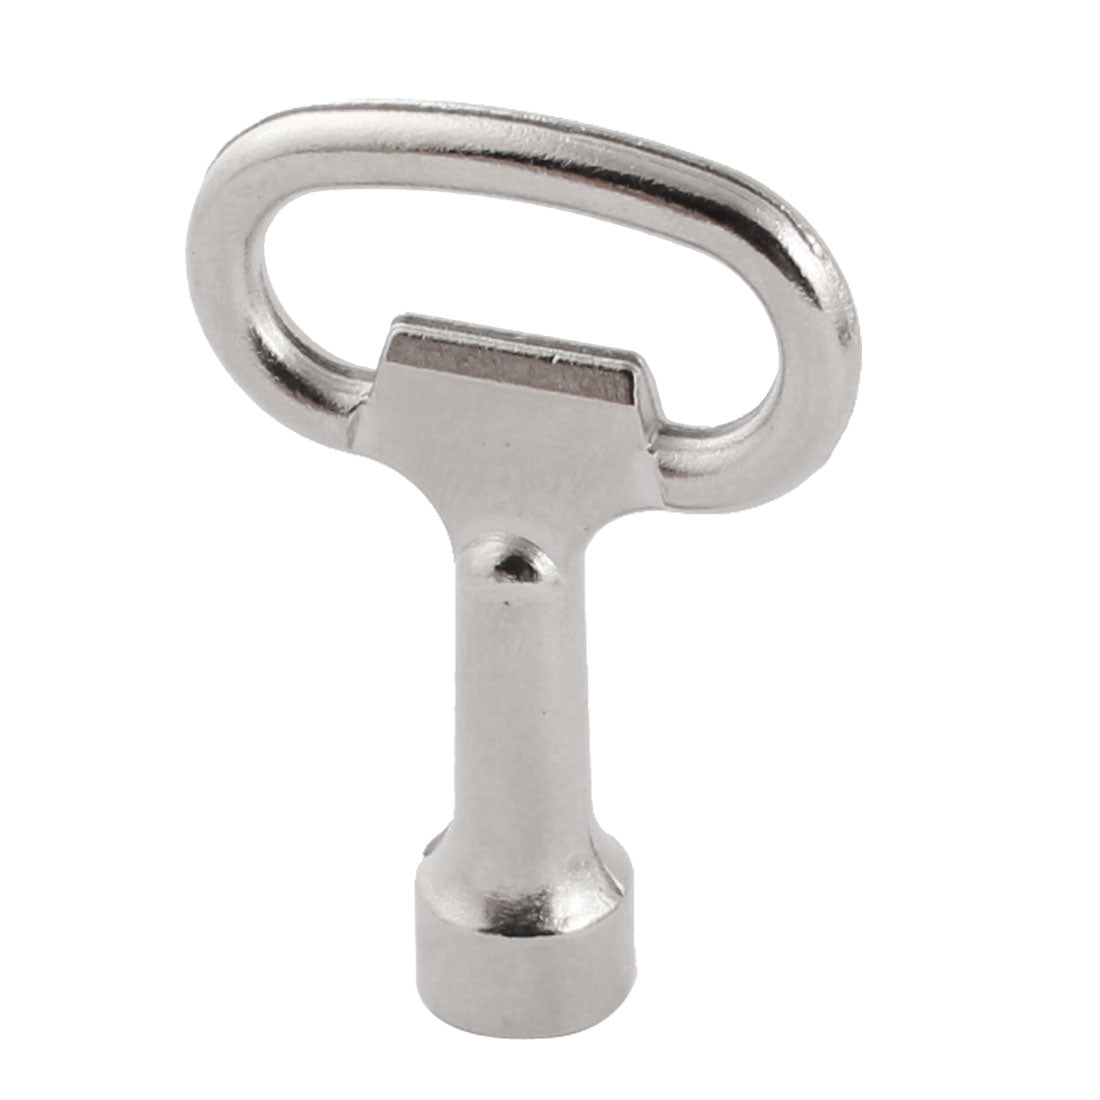 uxcell Uxcell Metal Square Socket Spanner Key for 8mm Panel Lock